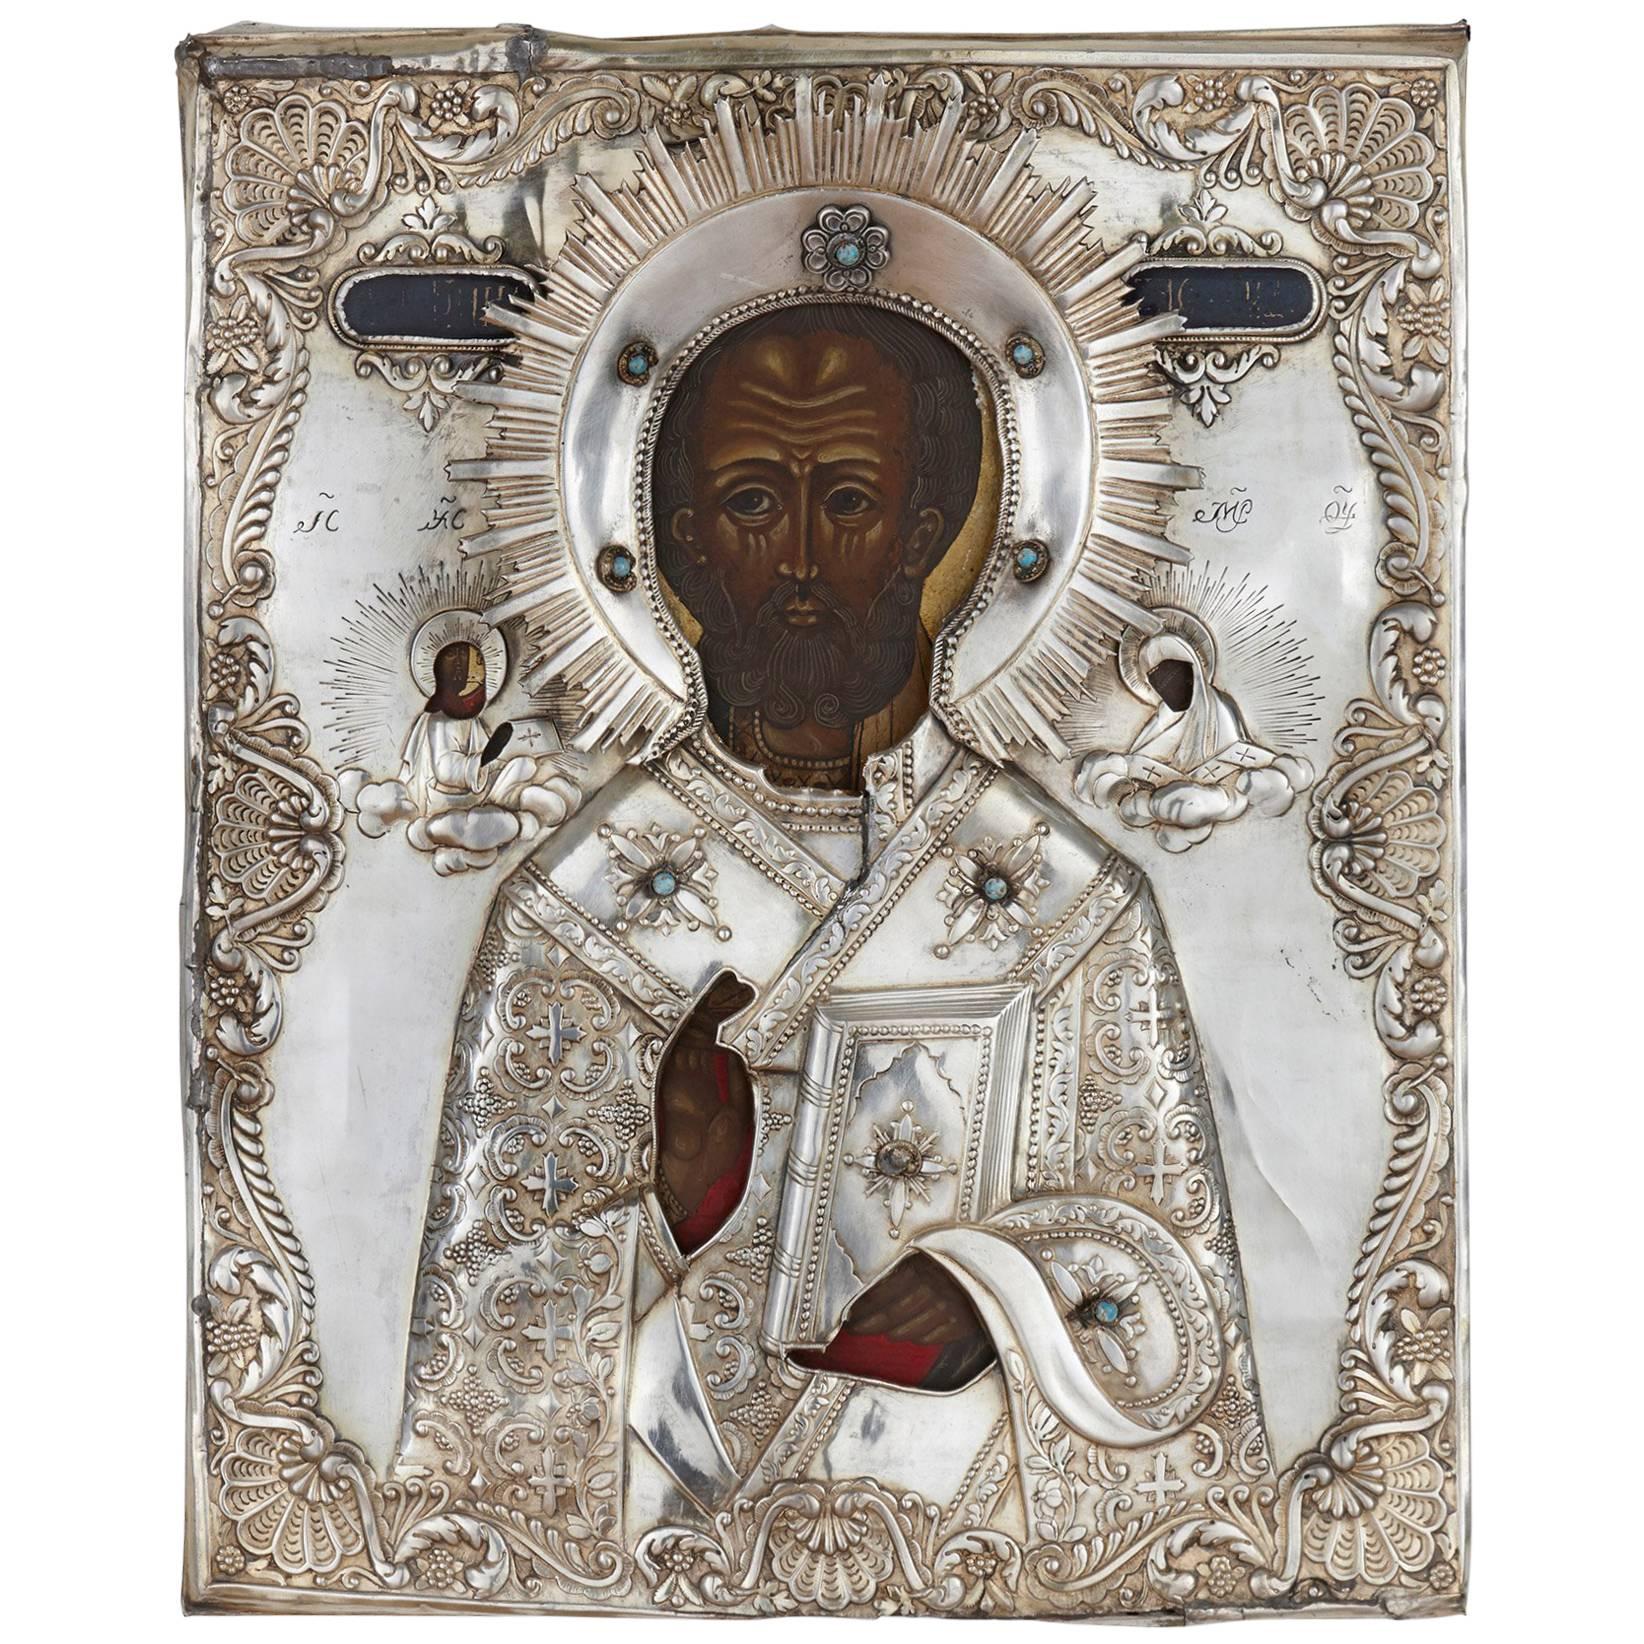 Jewelled, Parcel-Gilt and Silver Russian Icon of St. Nicholas